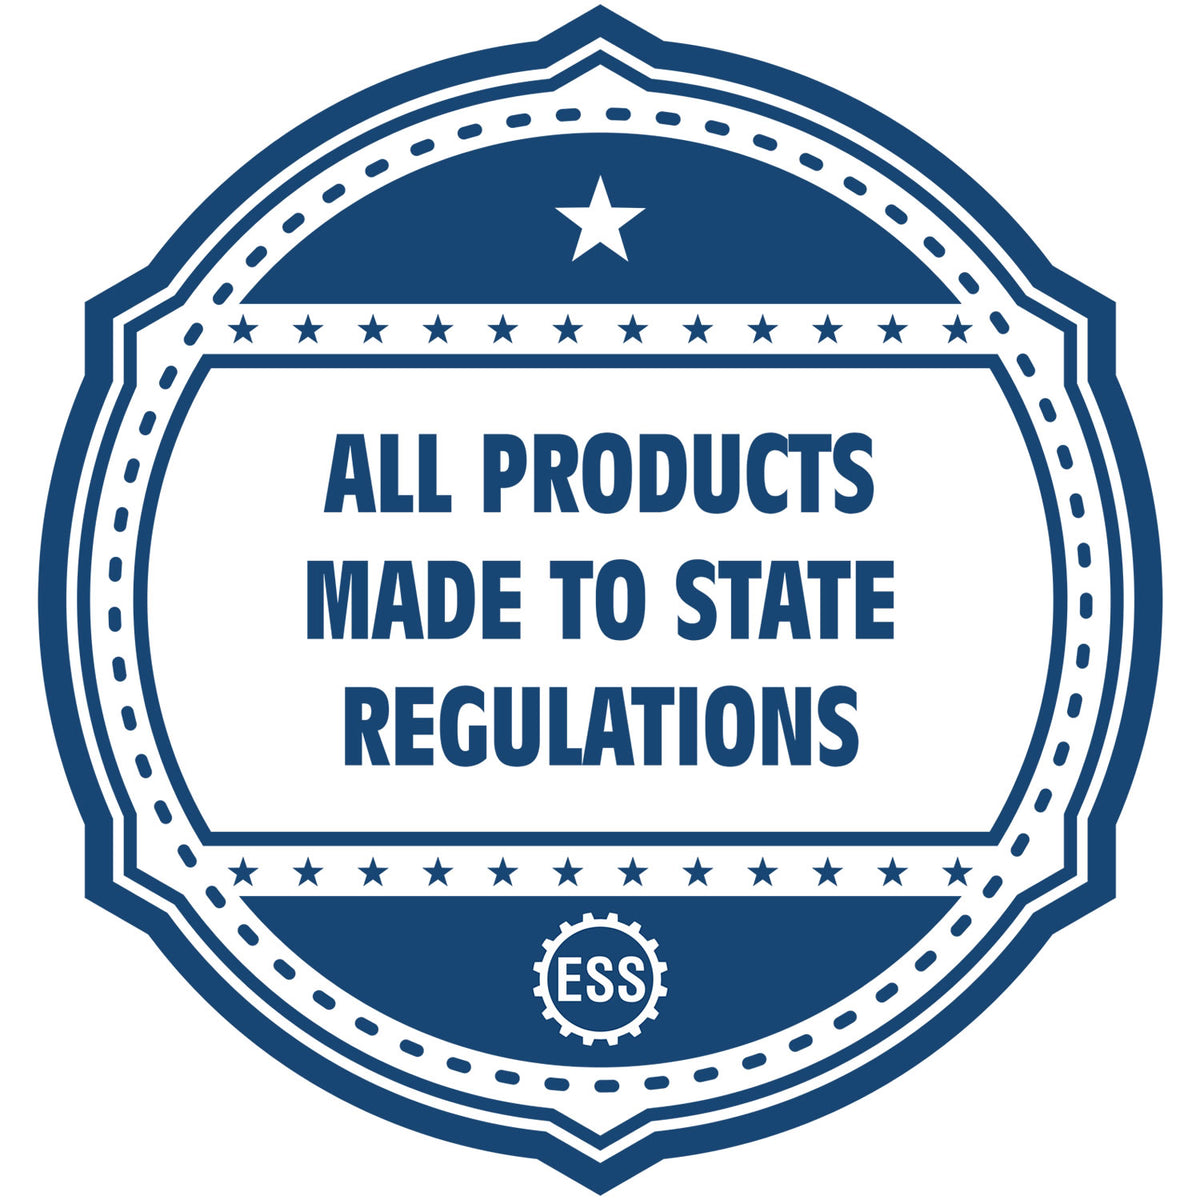 An icon or badge element for the Digital Ohio PE Stamp and Electronic Seal for Ohio Engineer showing that this product is made in compliance with state regulations.